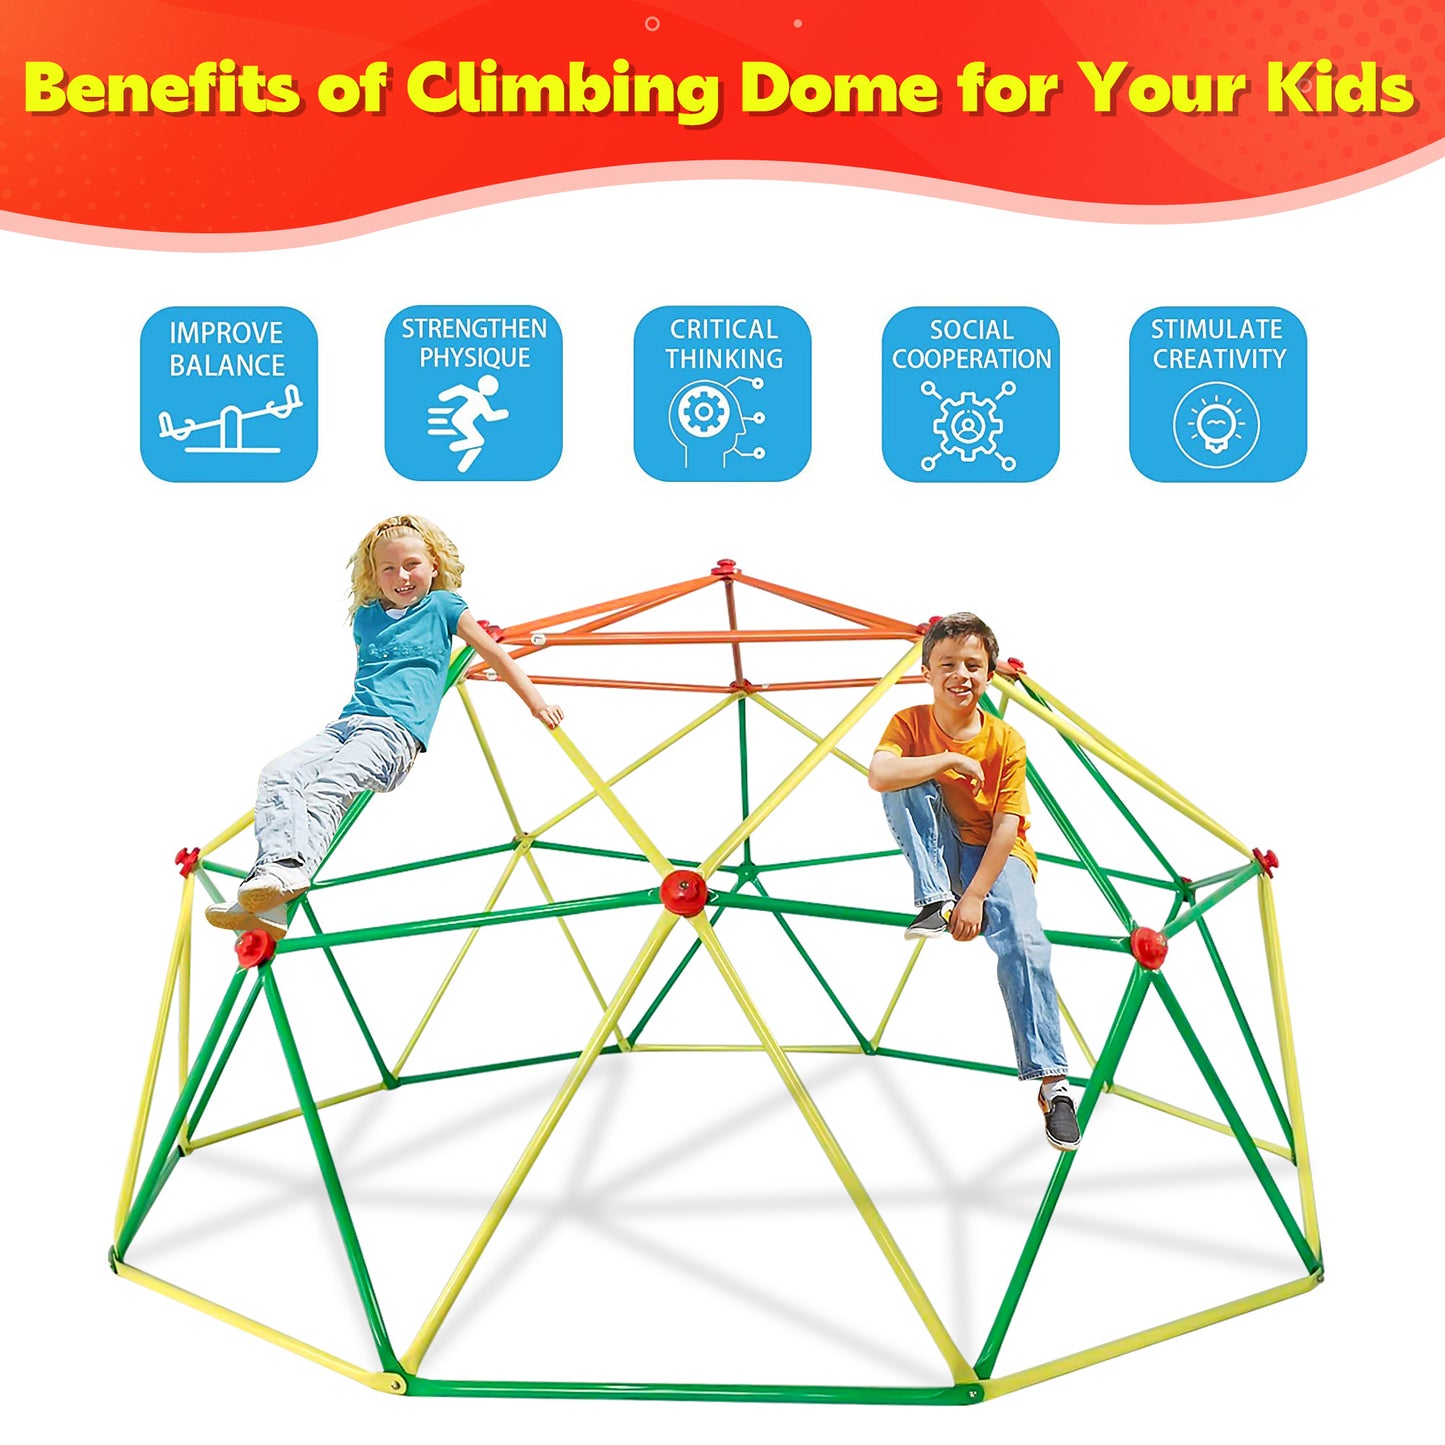 6ft Climbing Dome, SYNGAR Kids Outdoor Geometric Dome Climber, Jungle Gym Dome for Boys/Girls Age 3-12 Years, Children Play Center, Support up to 500 lbs, D5599